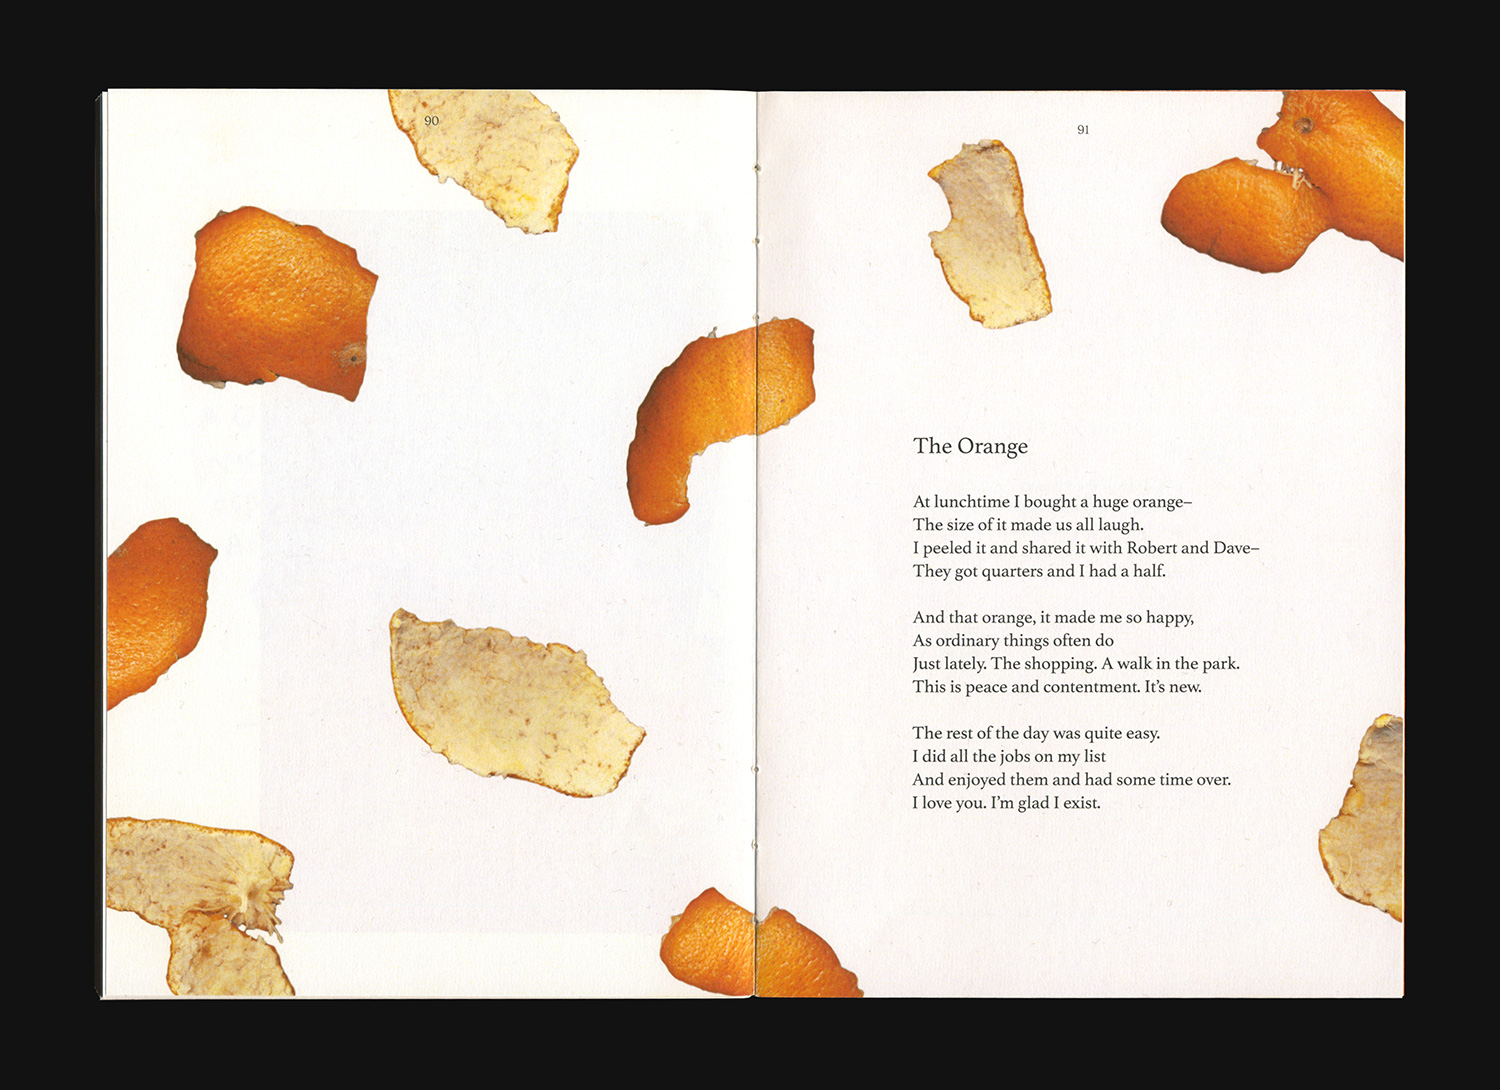 Book spread with aa poem and orange peels.